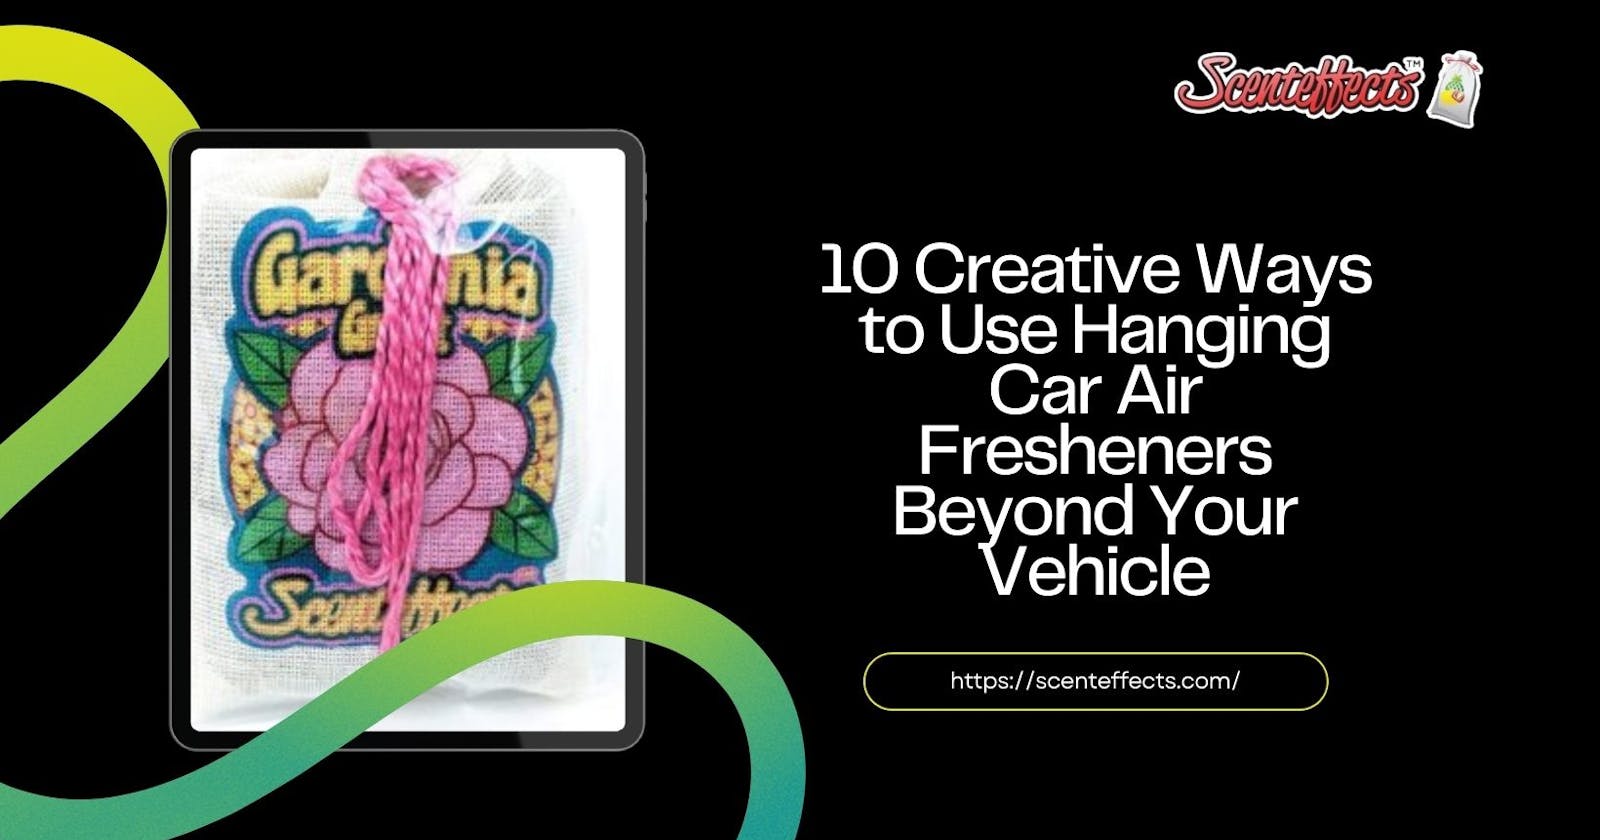 10 Creative Ways to Use Hanging Car Air Fresheners Beyond Your Vehicle